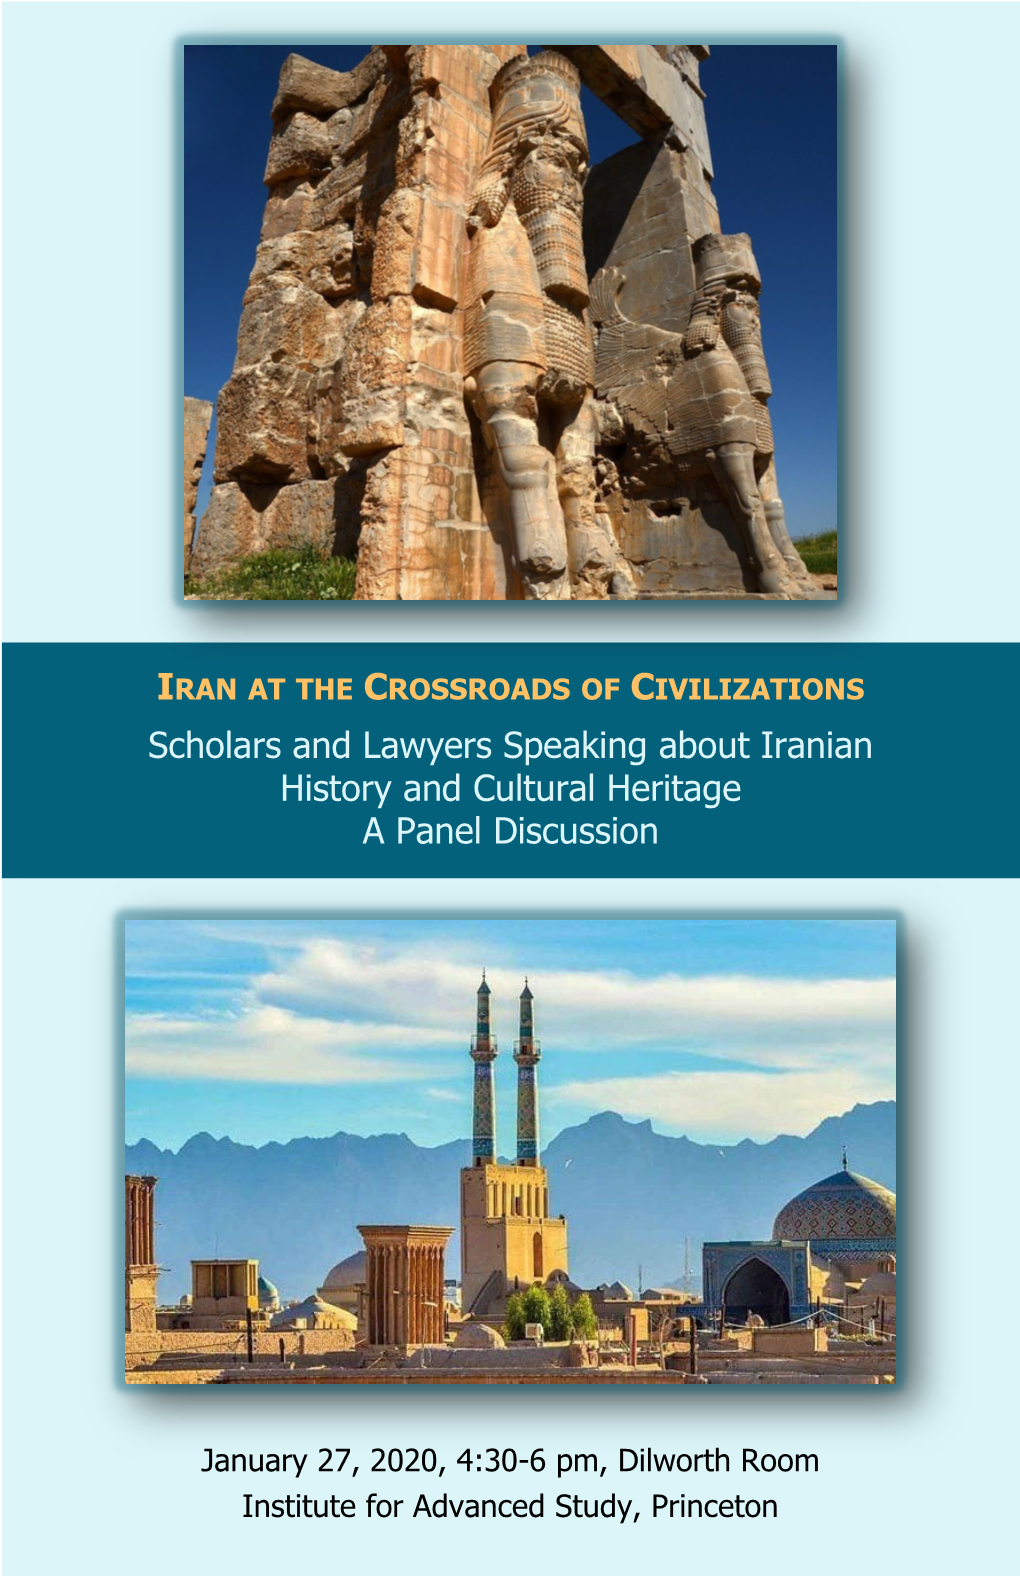 Scholars and Lawyers Speaking About Iranian History and Cultural